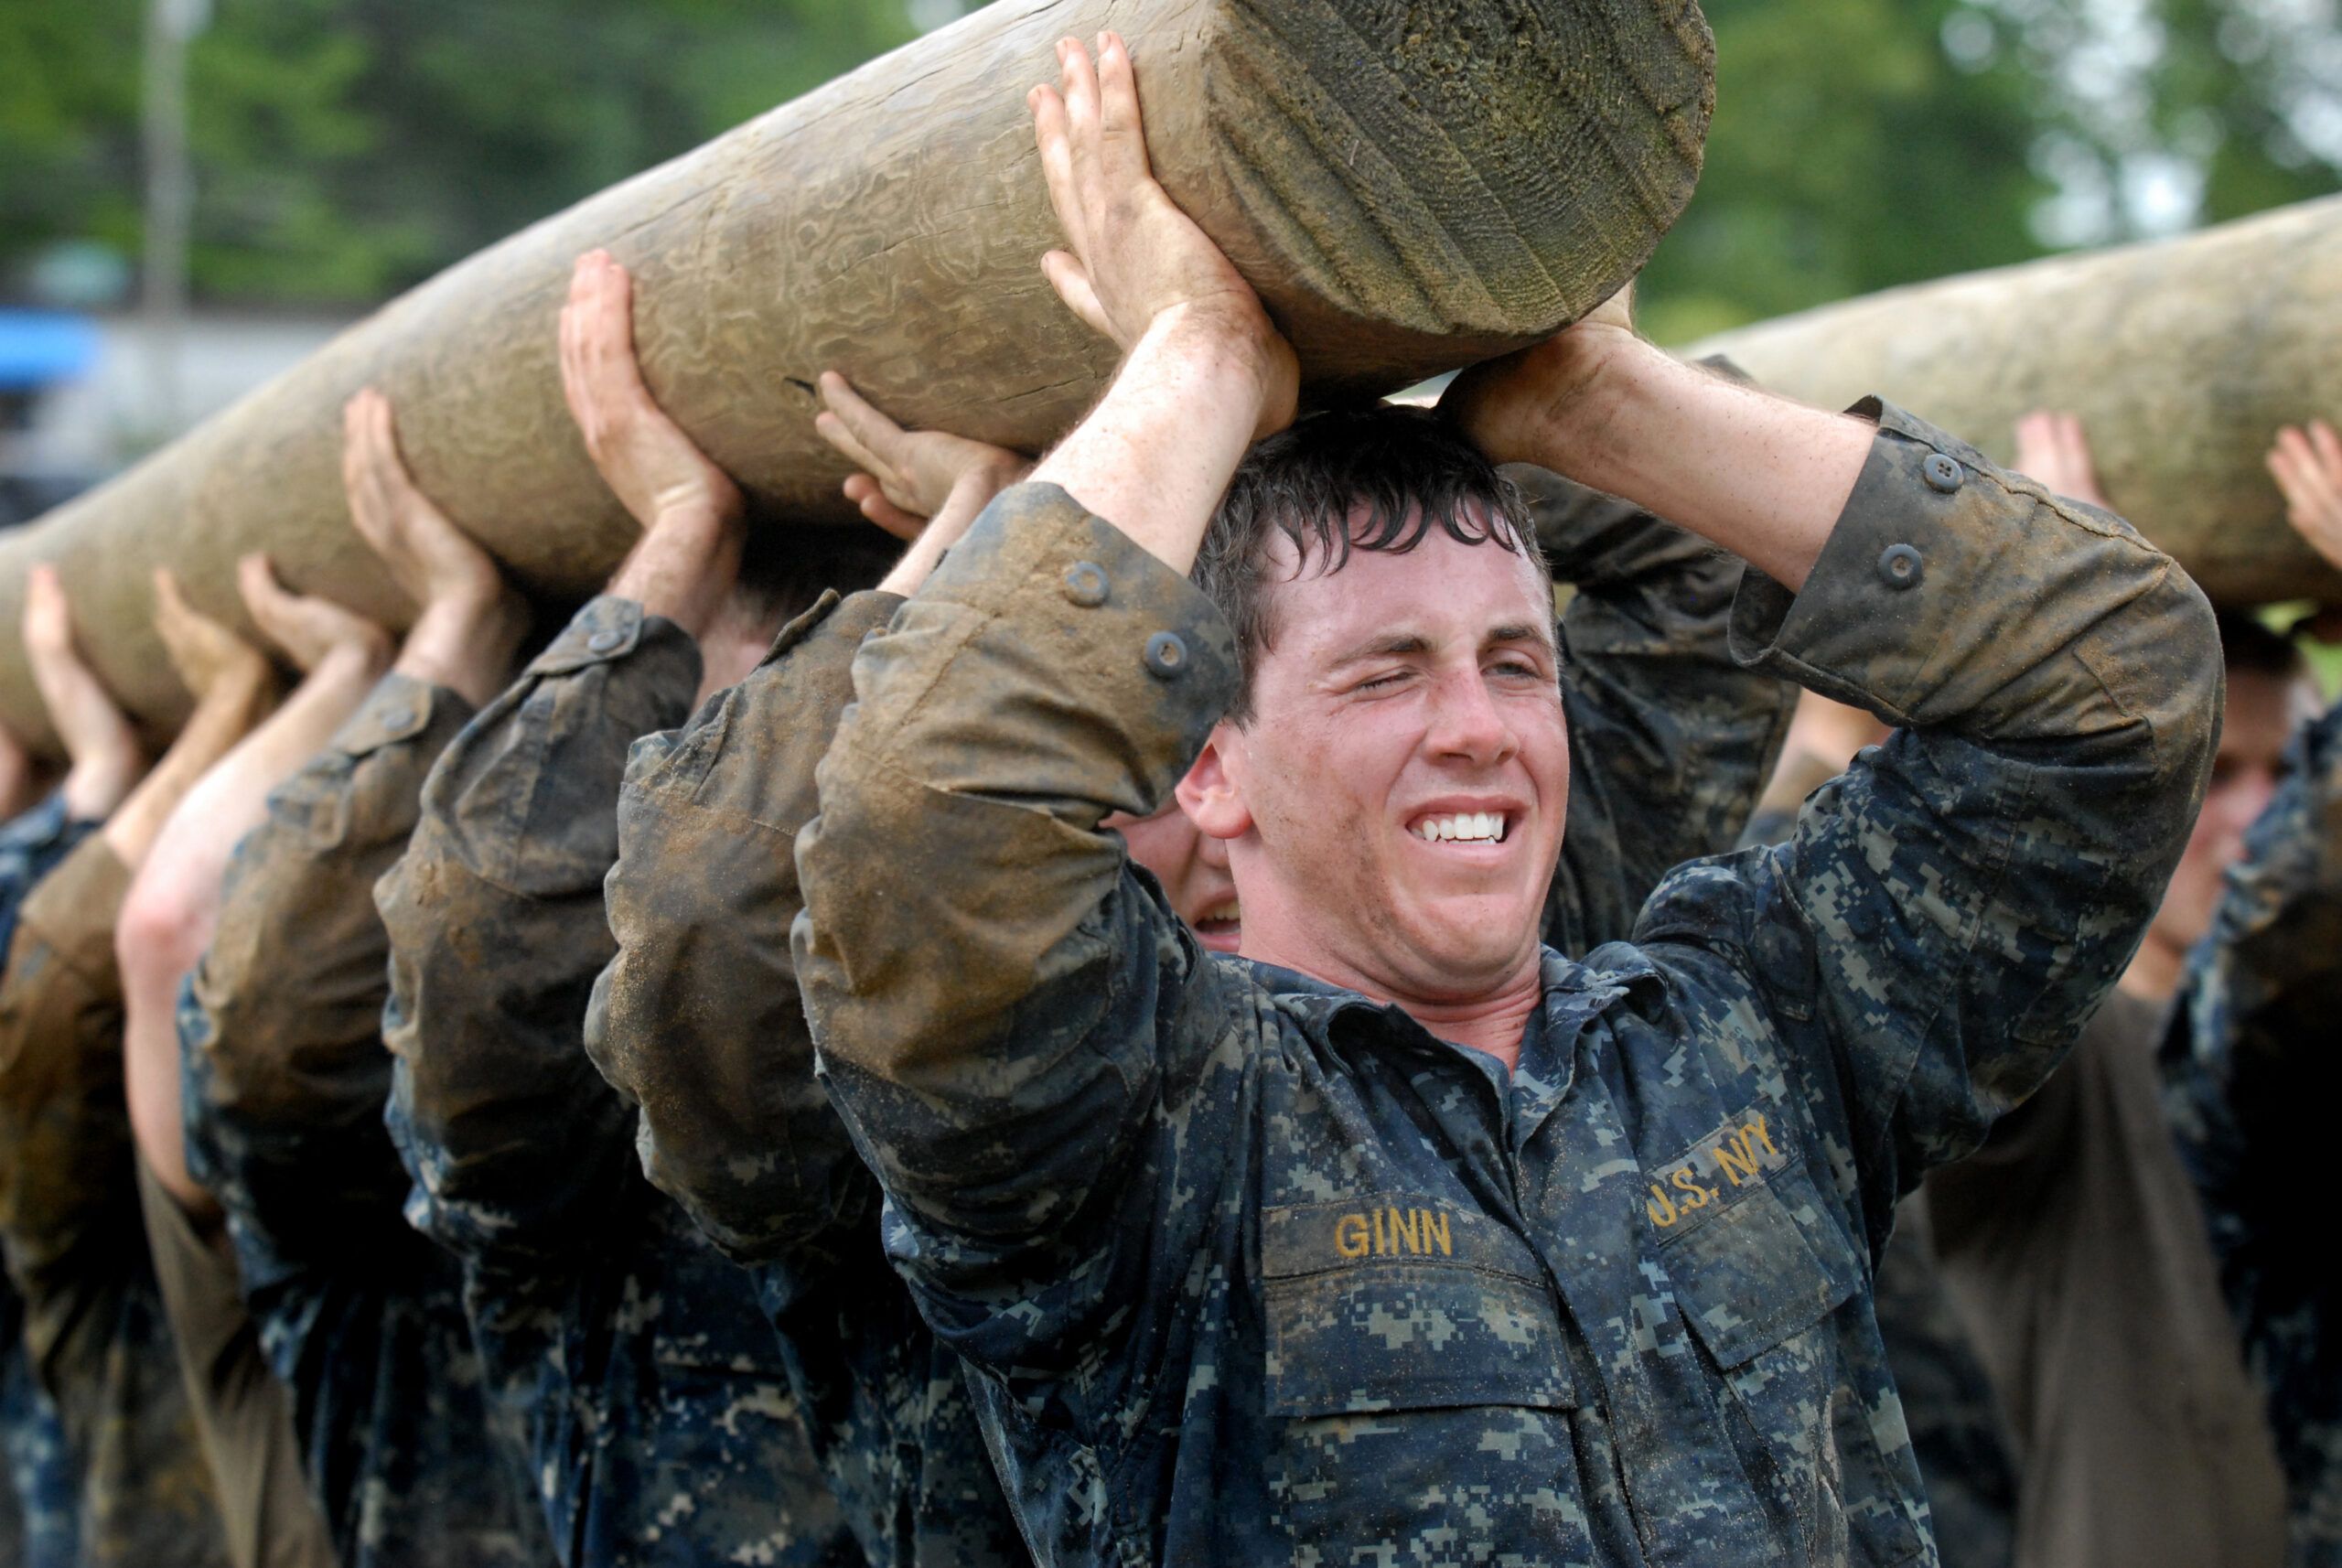 team of military members lifting a log over their heads as one unit